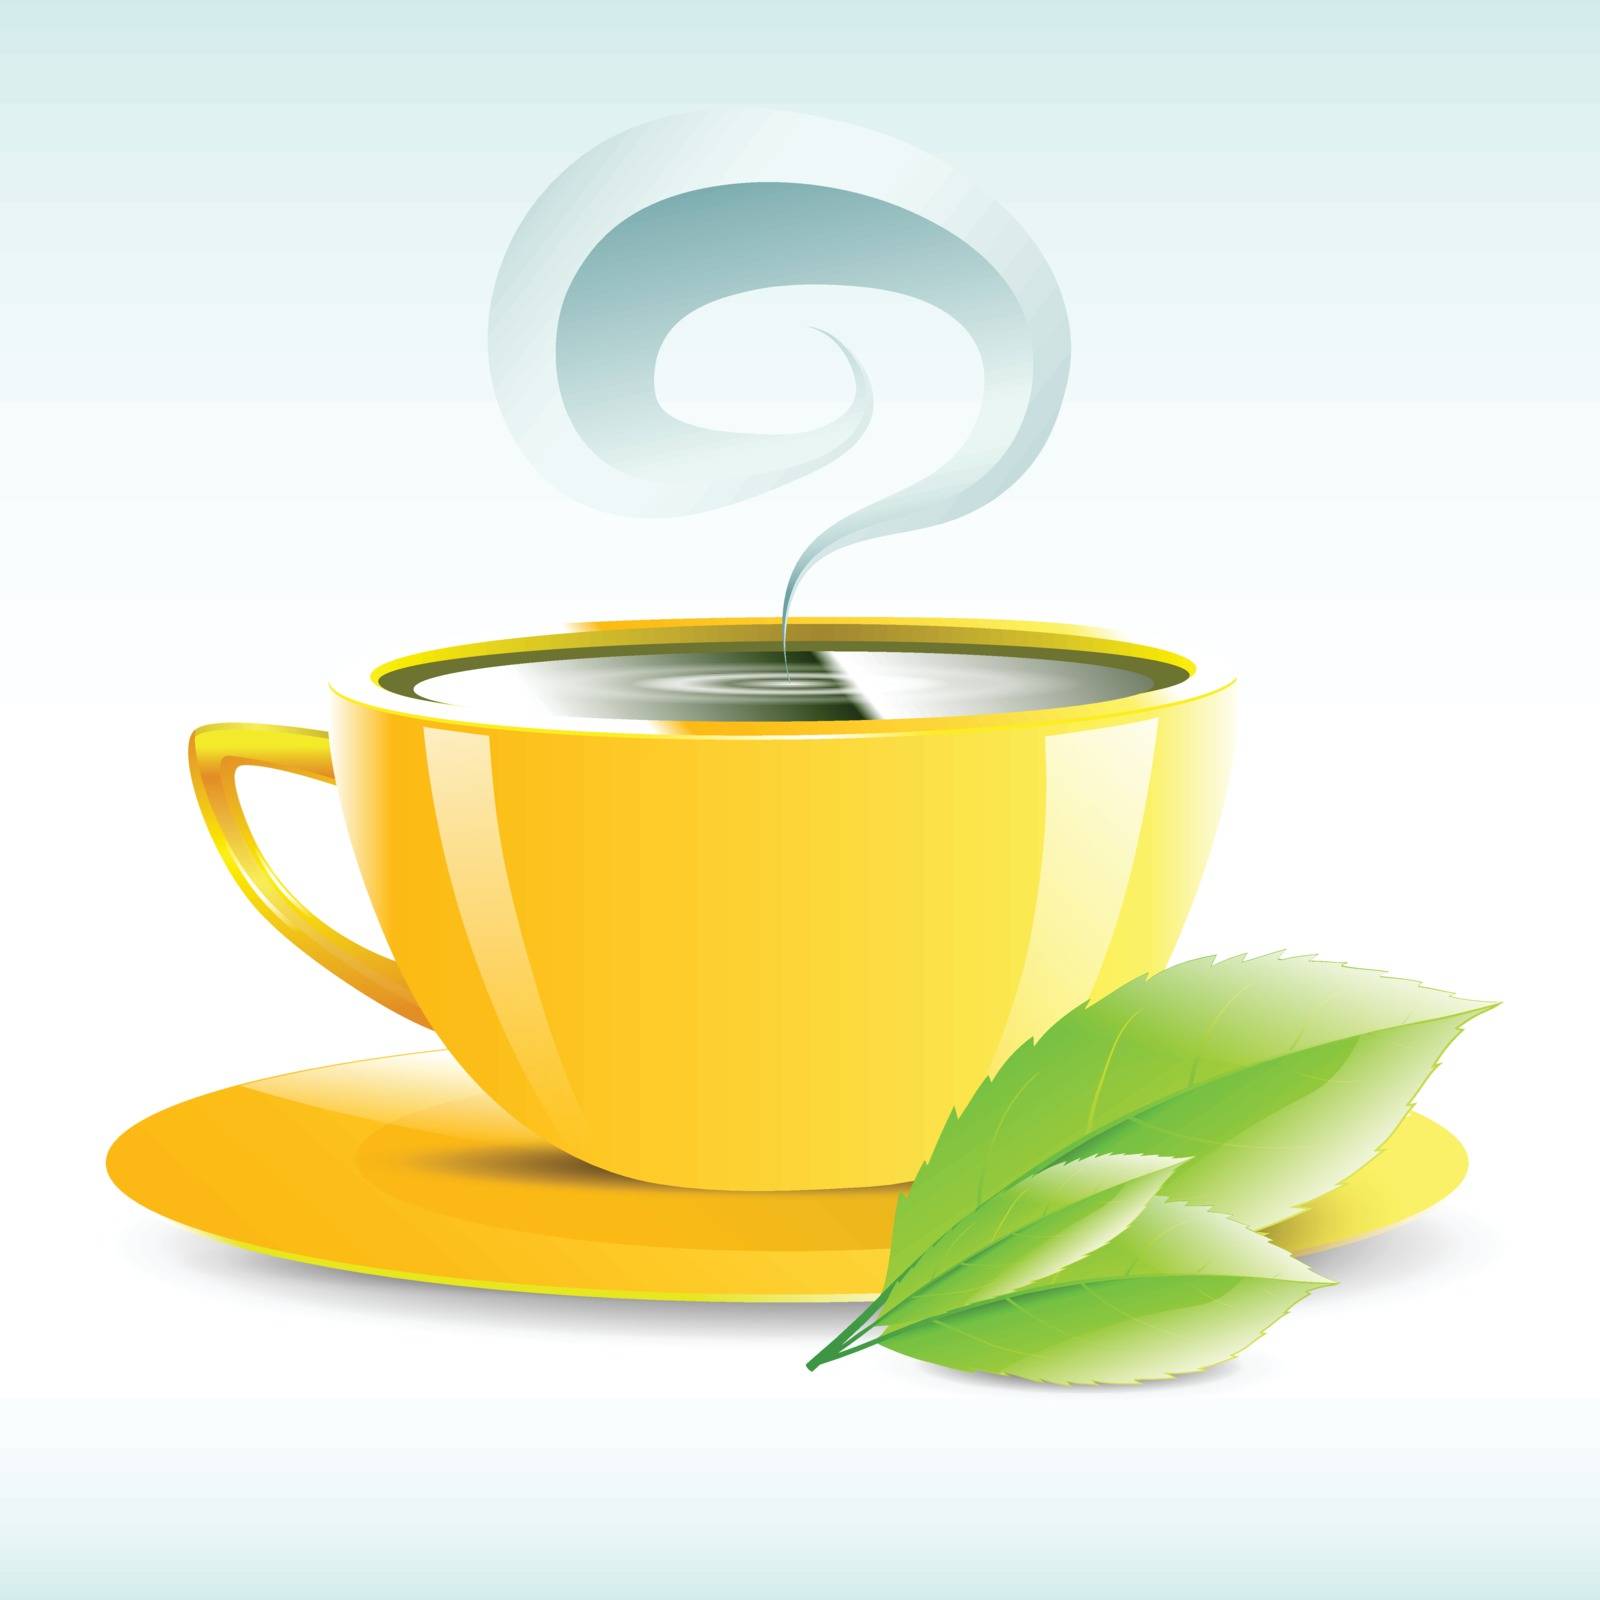 vector illustration of a yellow cup of hot tea grain pairs by moleks